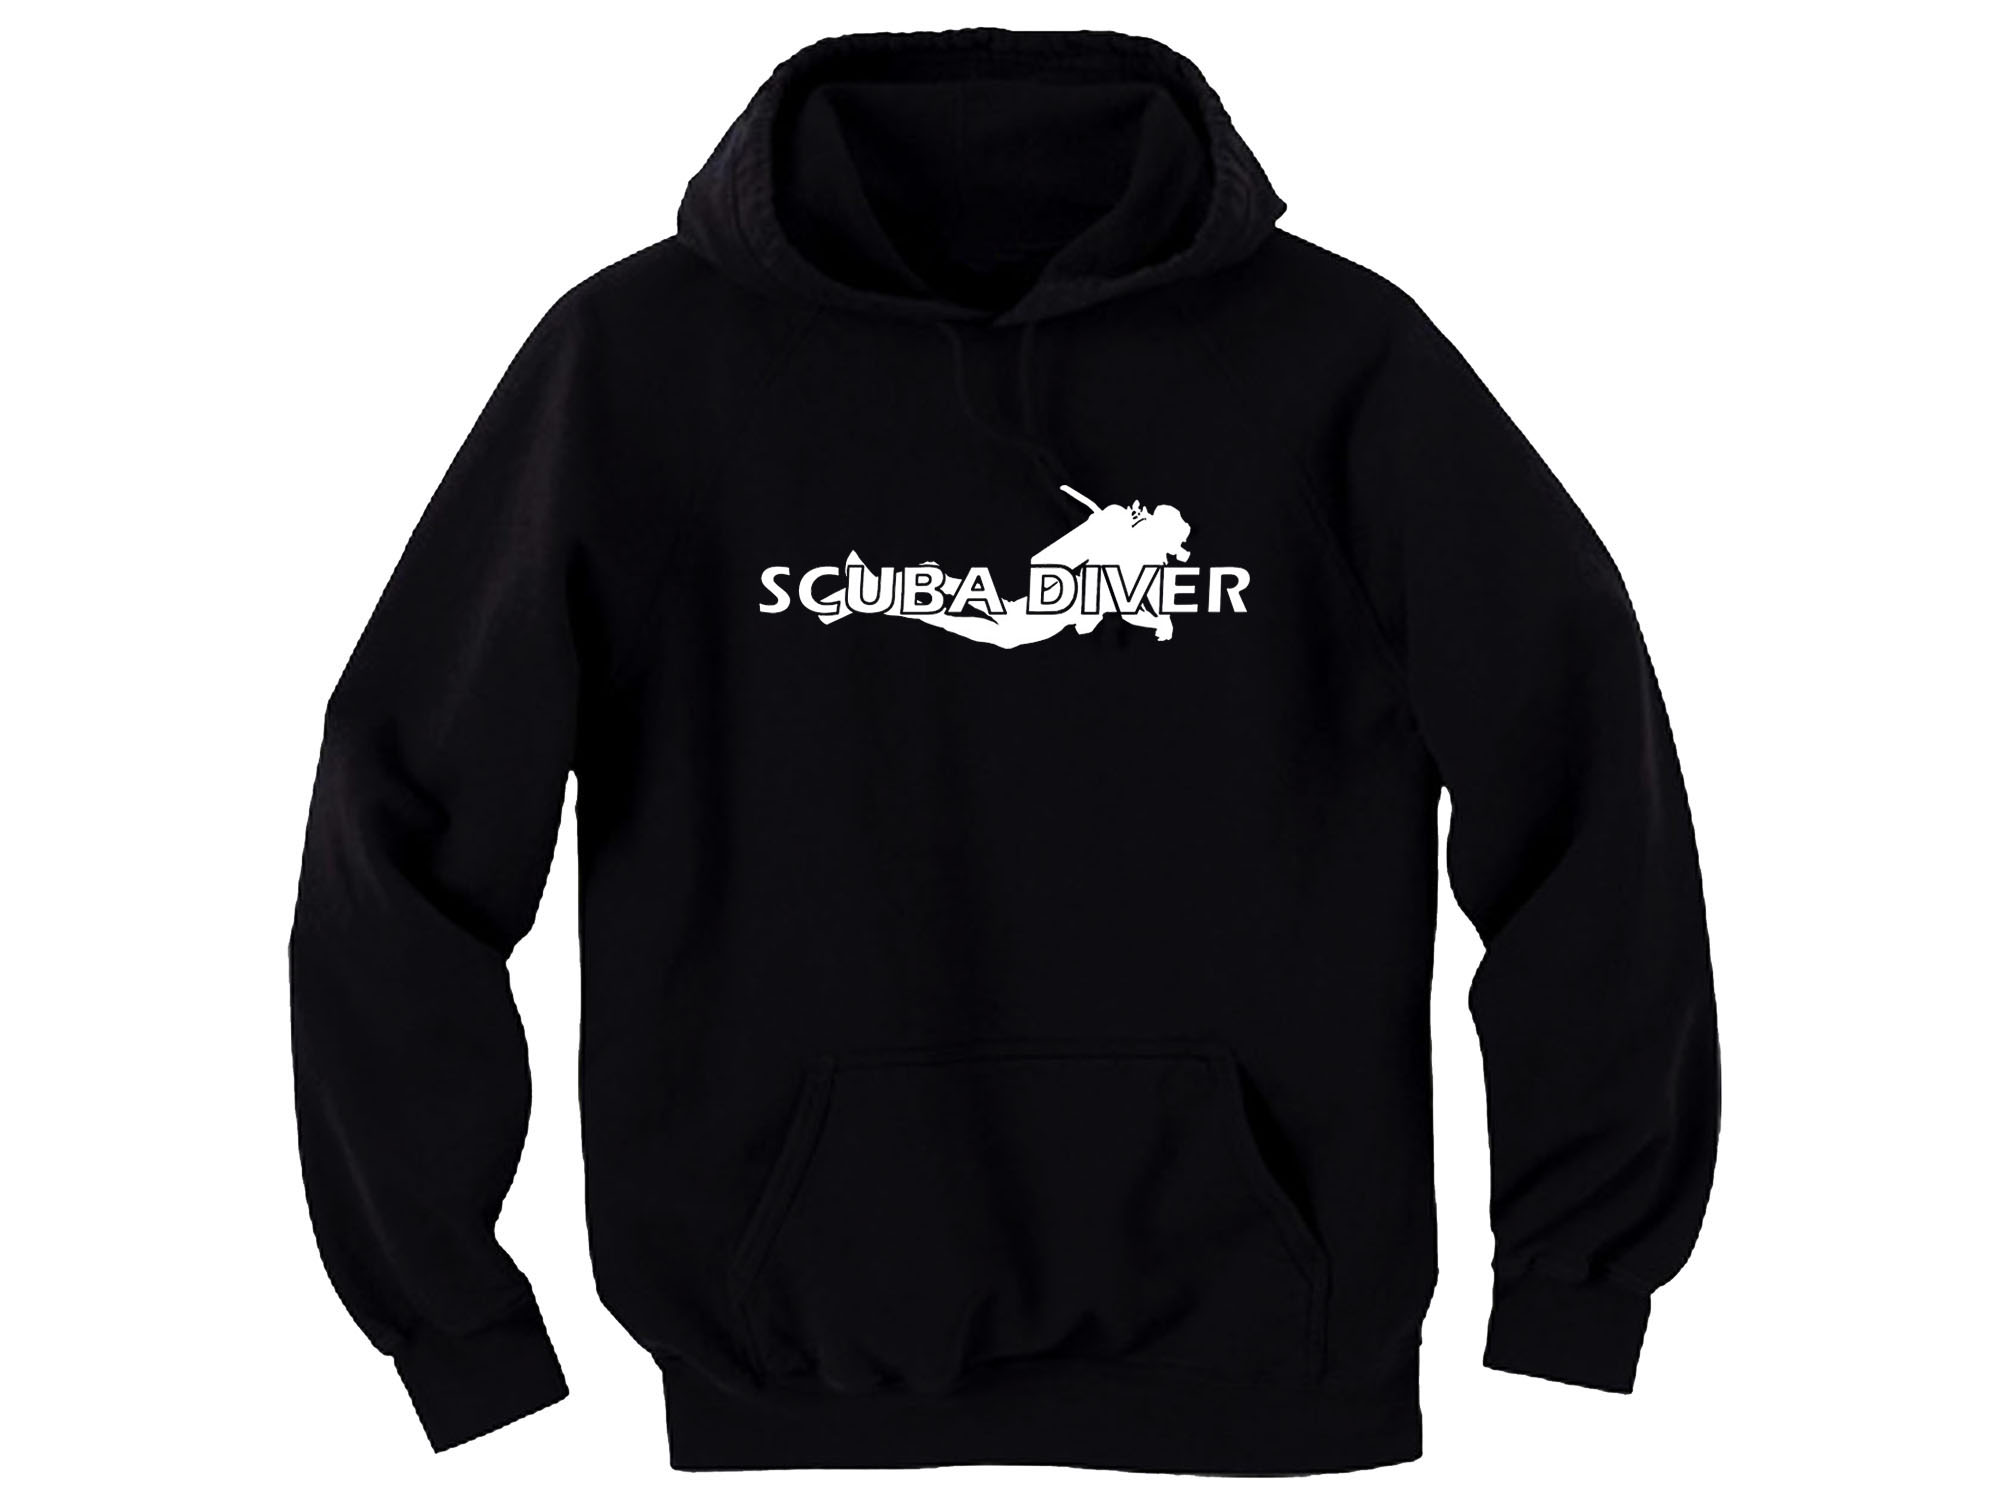 Scuba diver diving new sweatshirt hoodie for man/women or youth